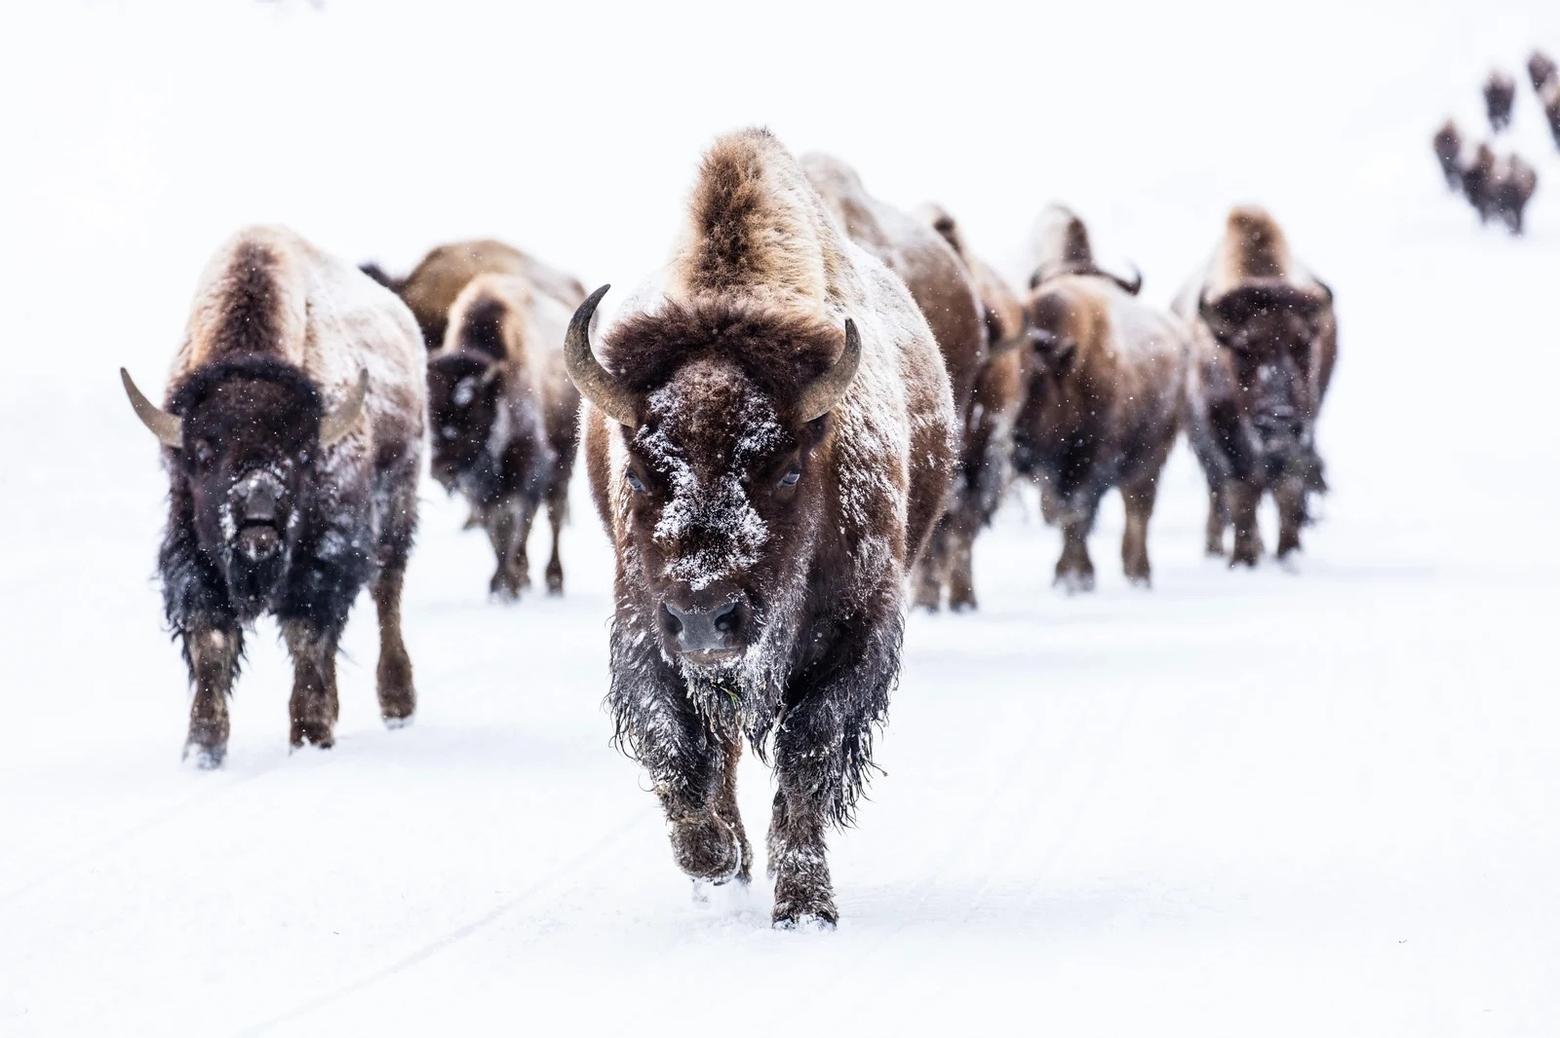 On the move. Yellowstone bison once roamed the Great Plains in the tens of millions. Now, after having balanced on the brink of extinction, numerous interests are battling over best management practices. Photo by Jacob W. Frank/NPS